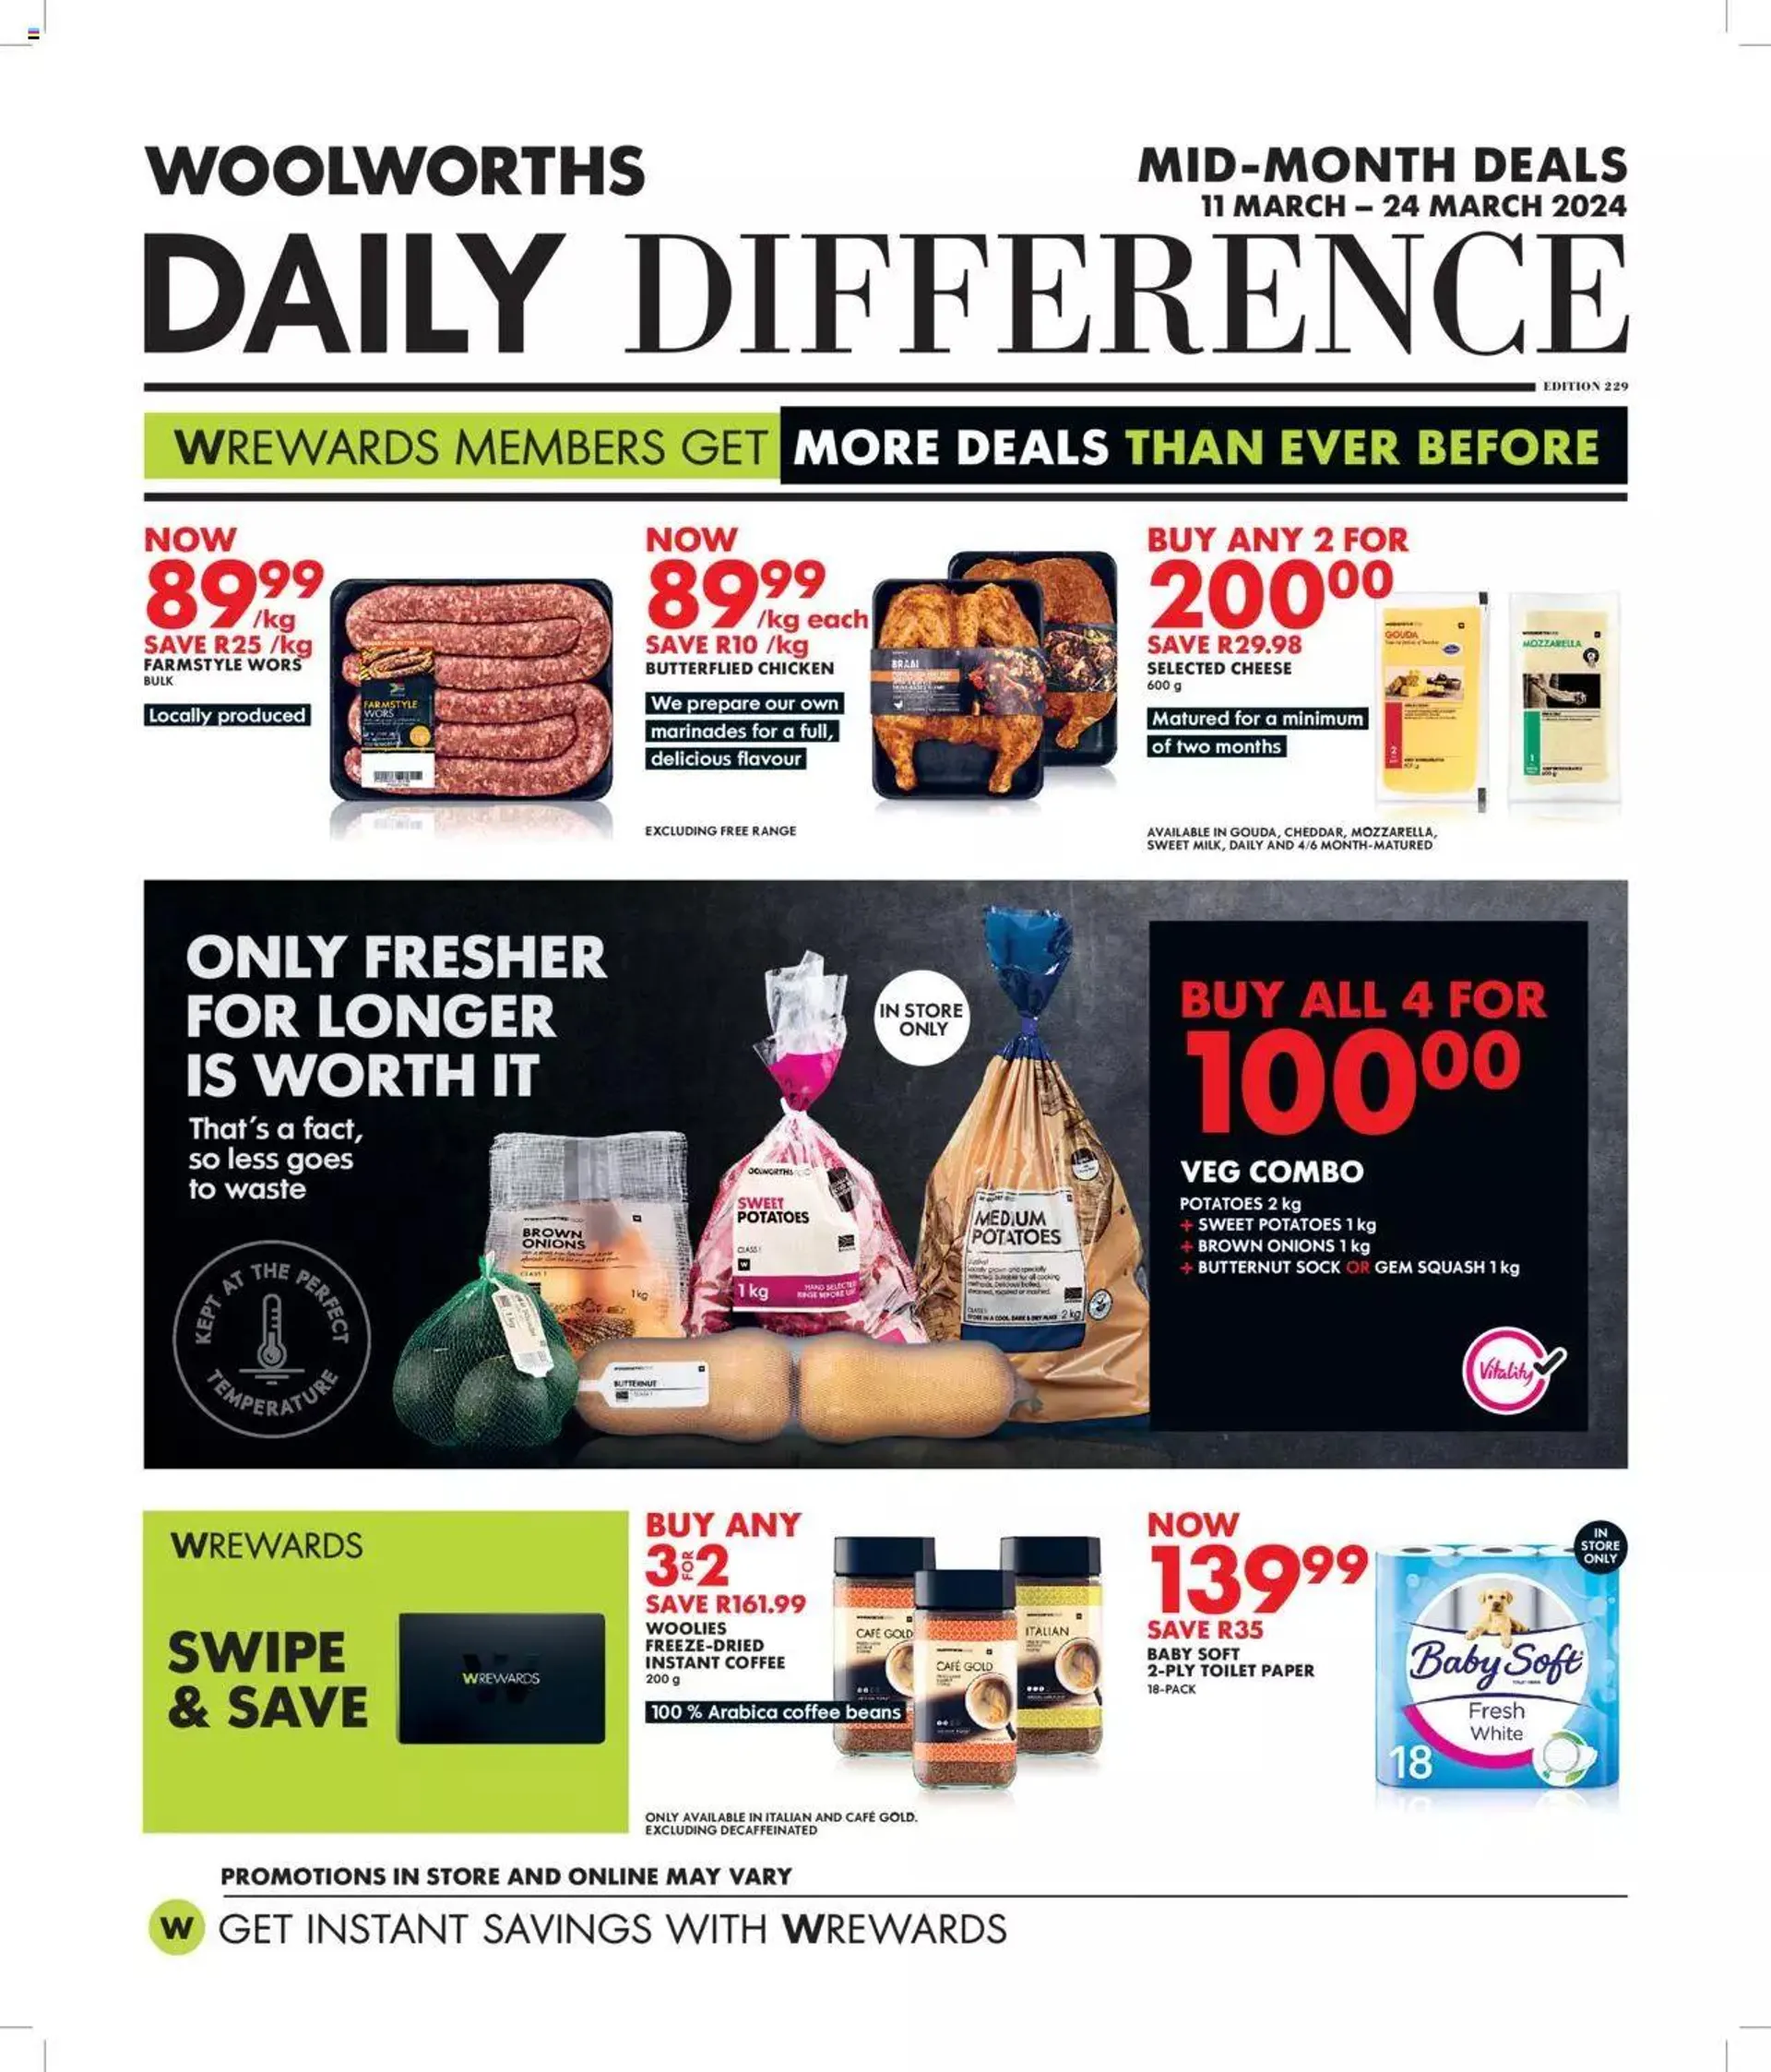 Woolworths Daily Difference - Gauteng - 11 March 24 March 2024 - Page 1